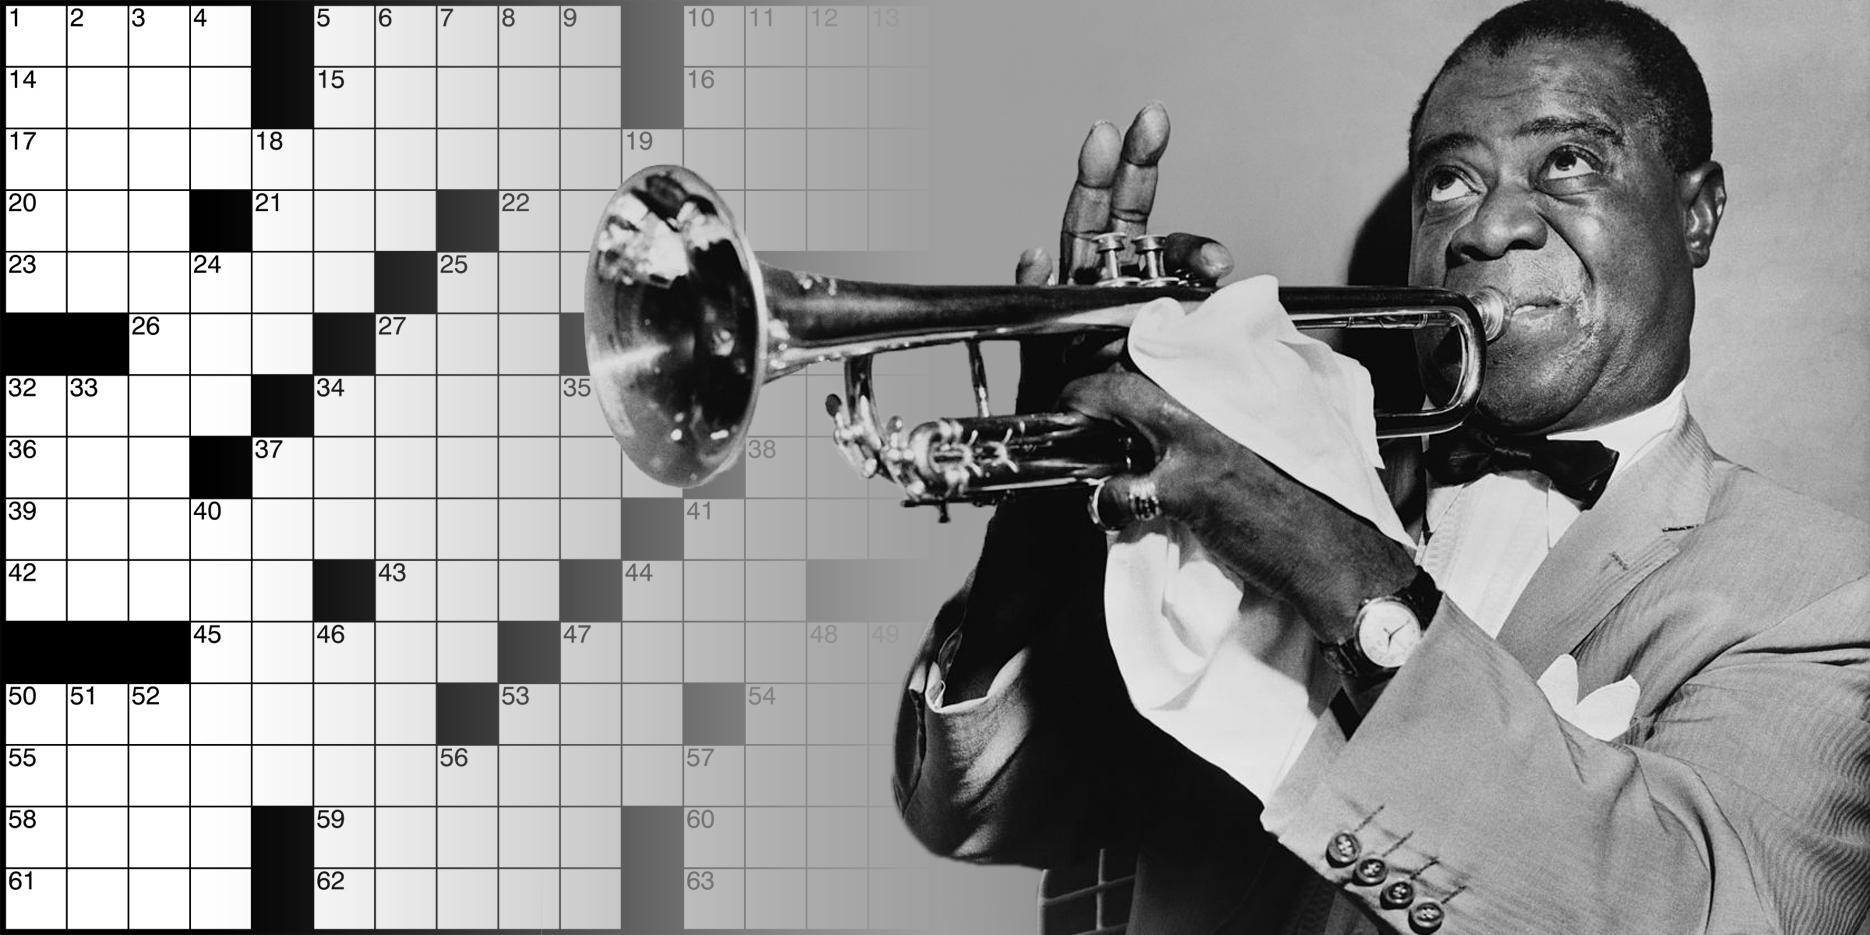 Test your knowledge of jazz with these word searches and crosswords